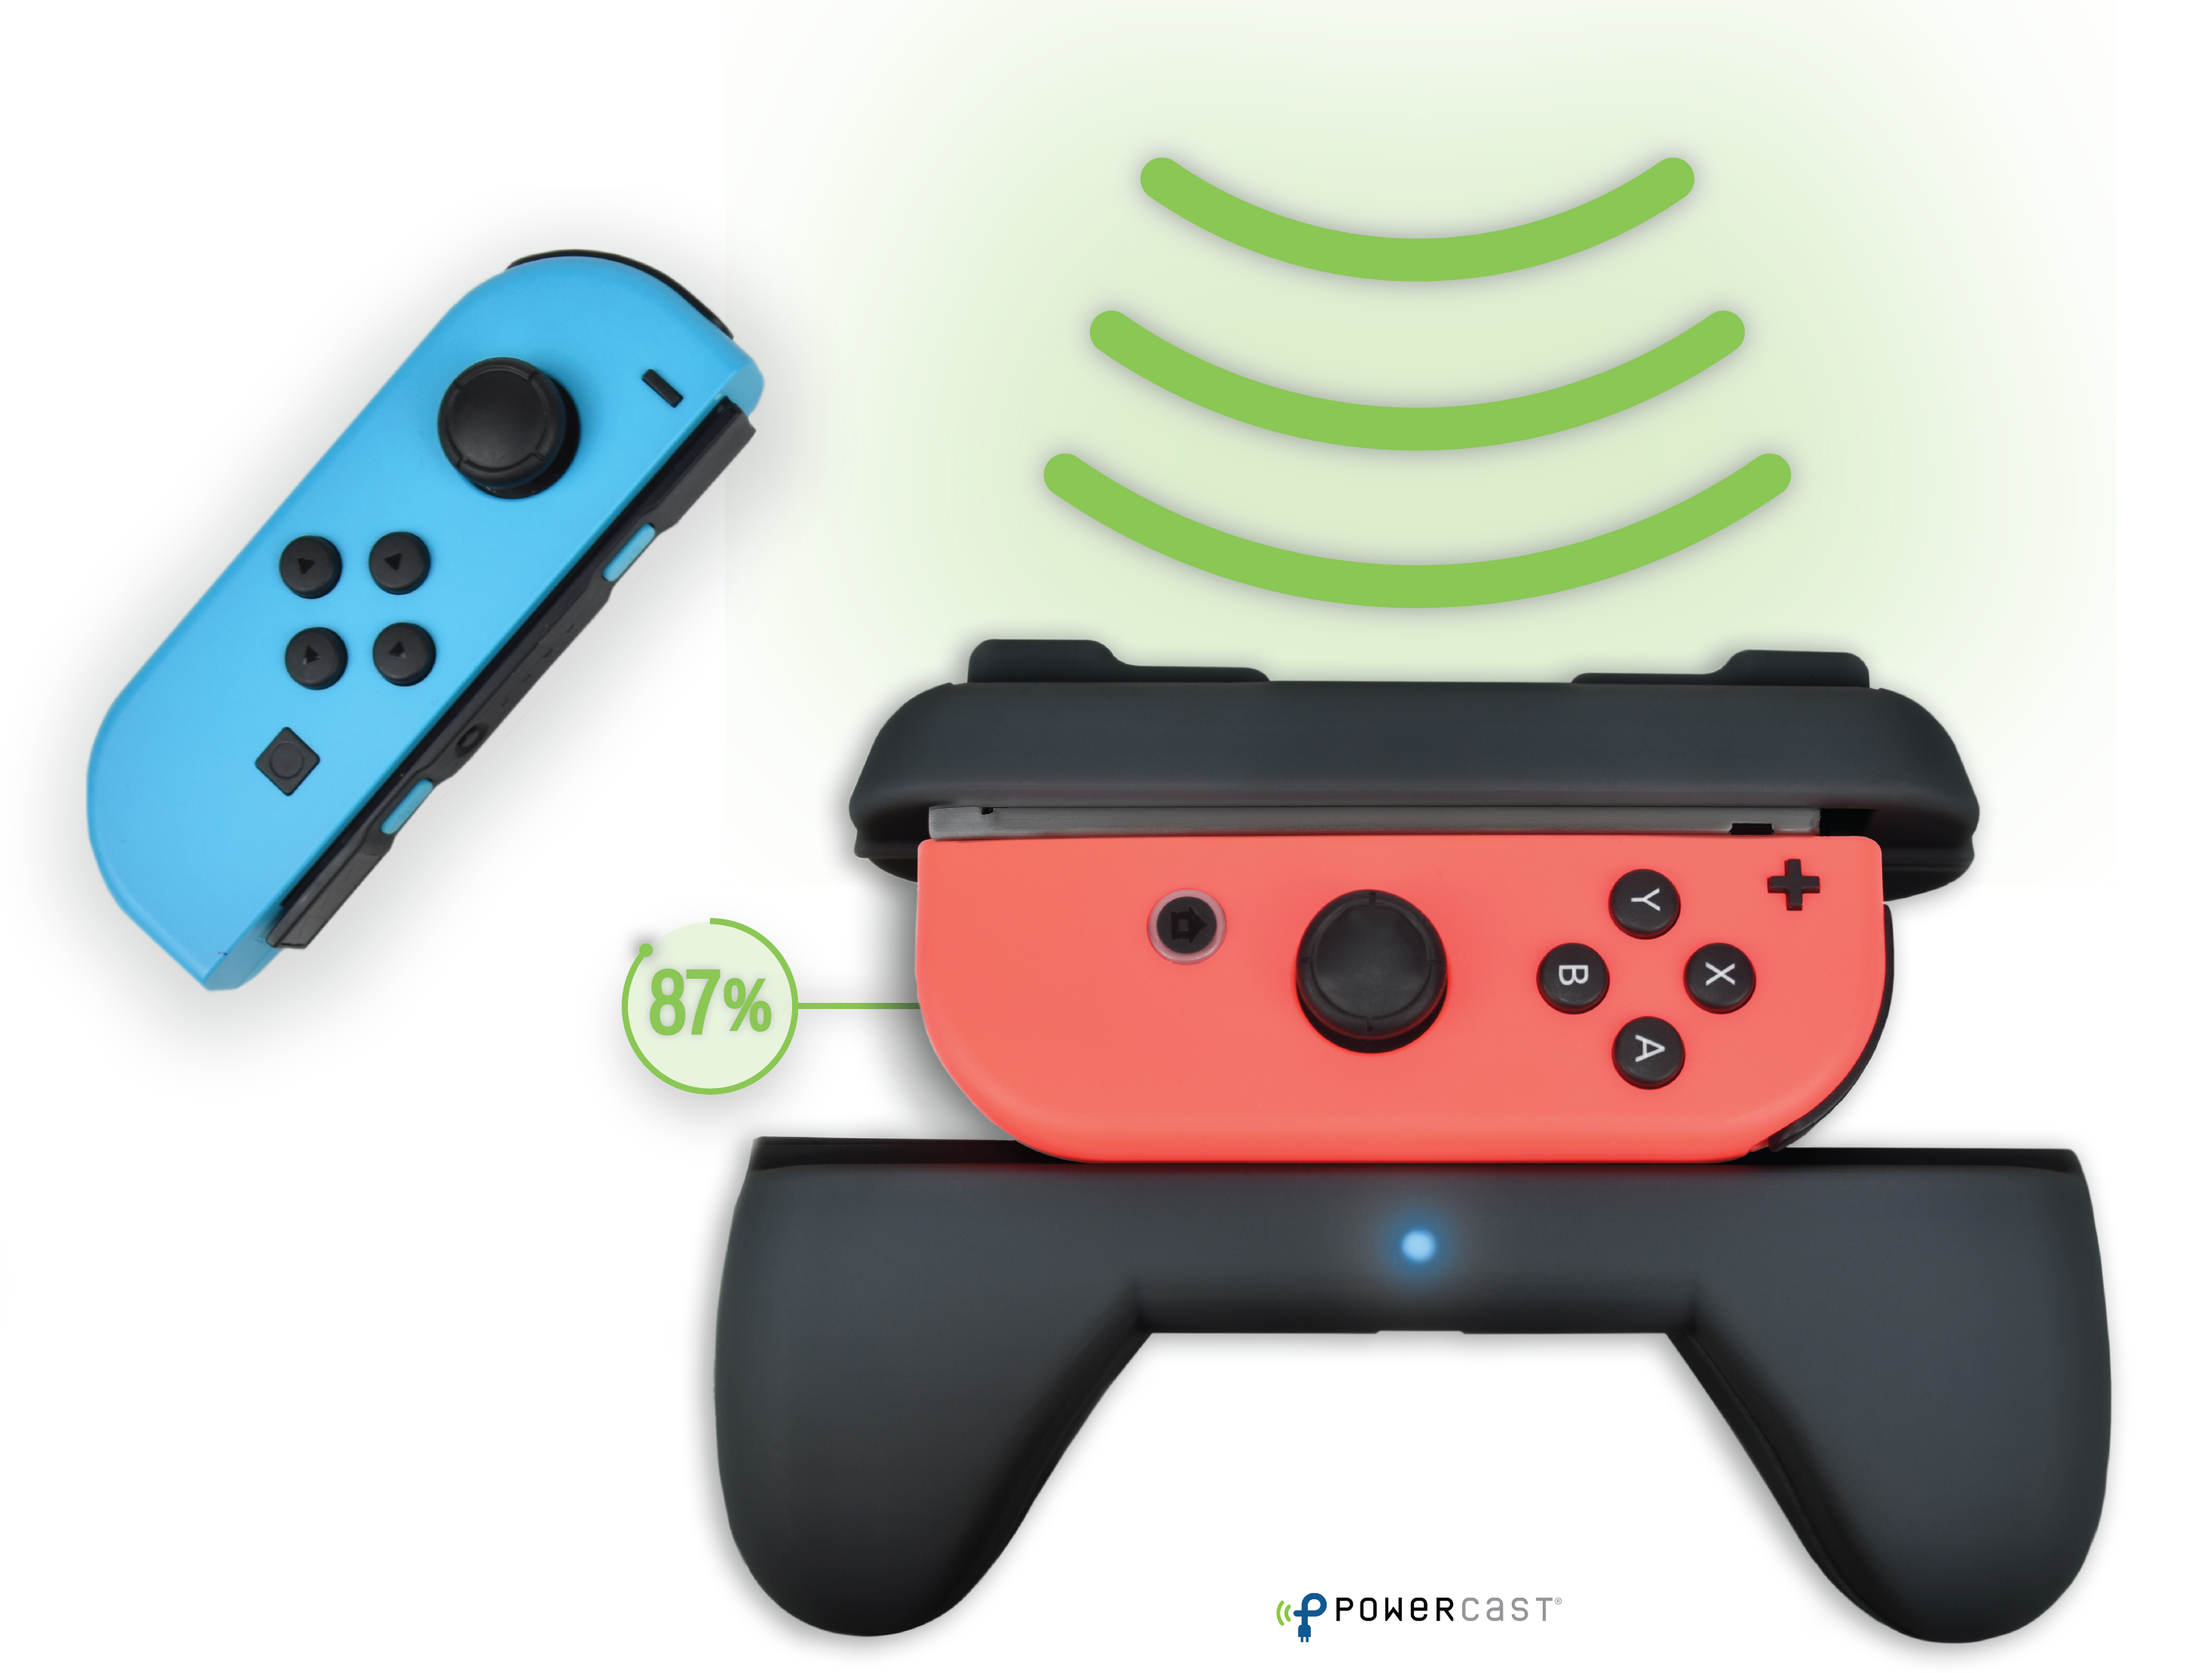 Wireless Charging Grips For Nintendo Joy-Con Controllers (PowerCast)